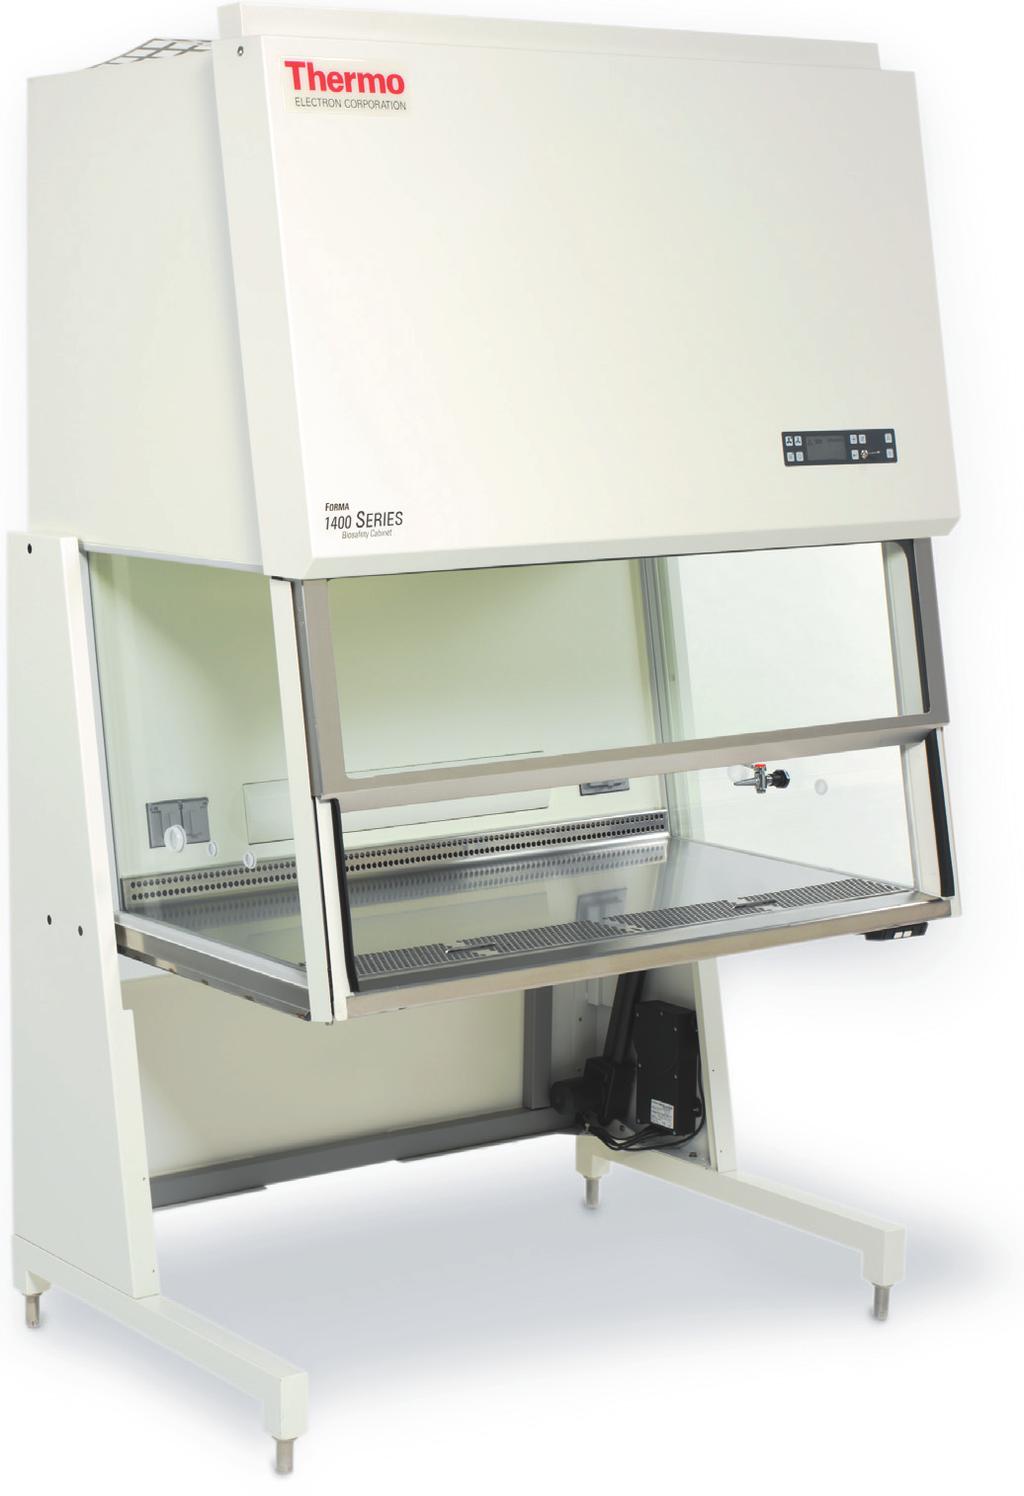 New levels of comfort and safety The Forma 1400 Series is a cutting-edge biological safety cabinet, combining advanced features and an innovative design to provide maximum support for your most